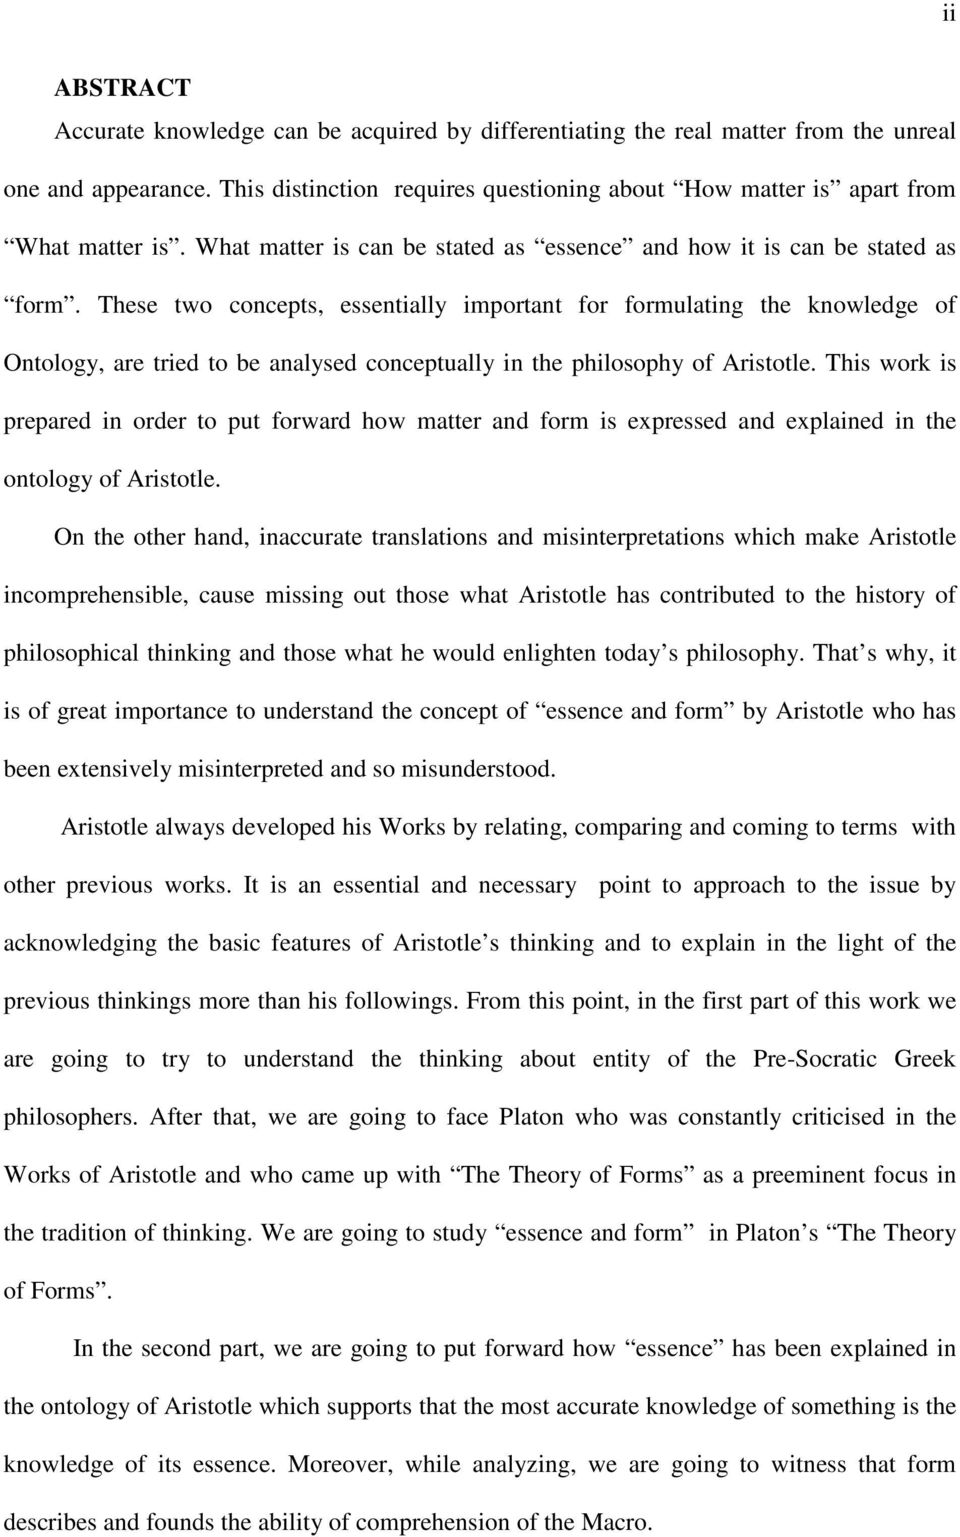 These two concepts, essentially important for formulating the knowledge of Ontology, are tried to be analysed conceptually in the philosophy of Aristotle.